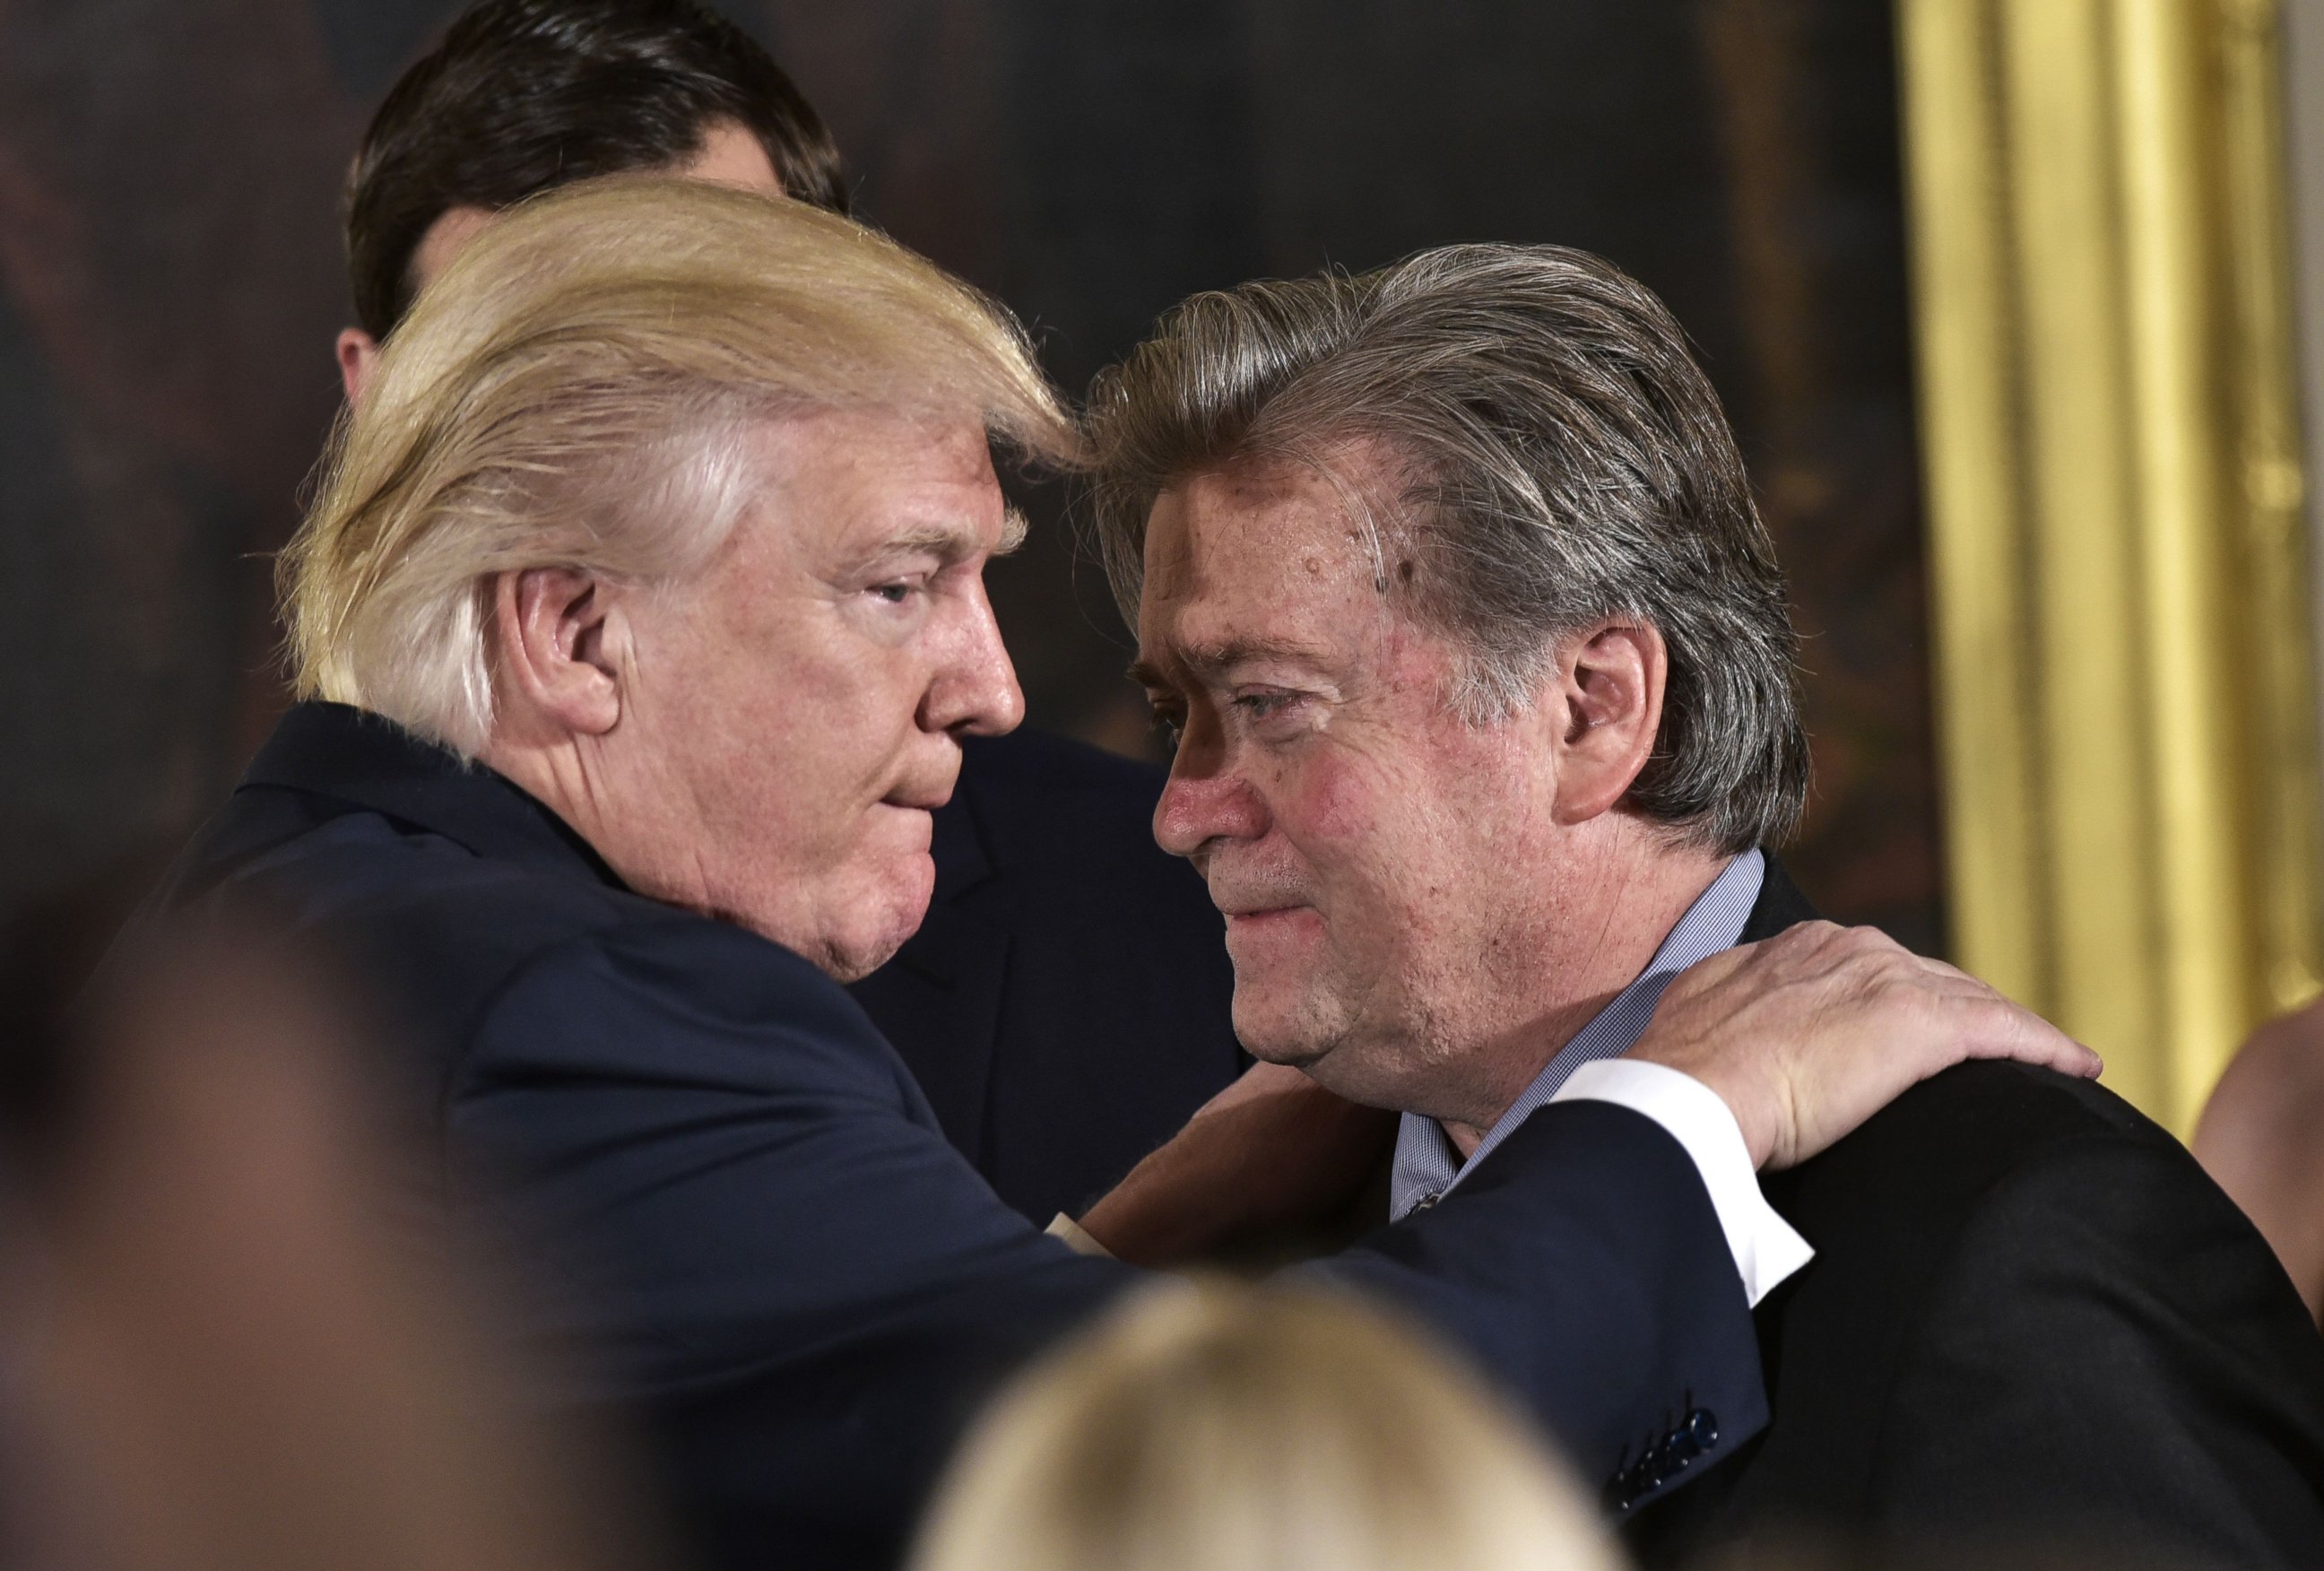 PHOTO: President Donald Trump congratulates Senior Counselor to the President Stephen Bannon during the swearing-in of senior staff in the East Room of the White House, Jan. 22, 2017 in Washington, D.C. 